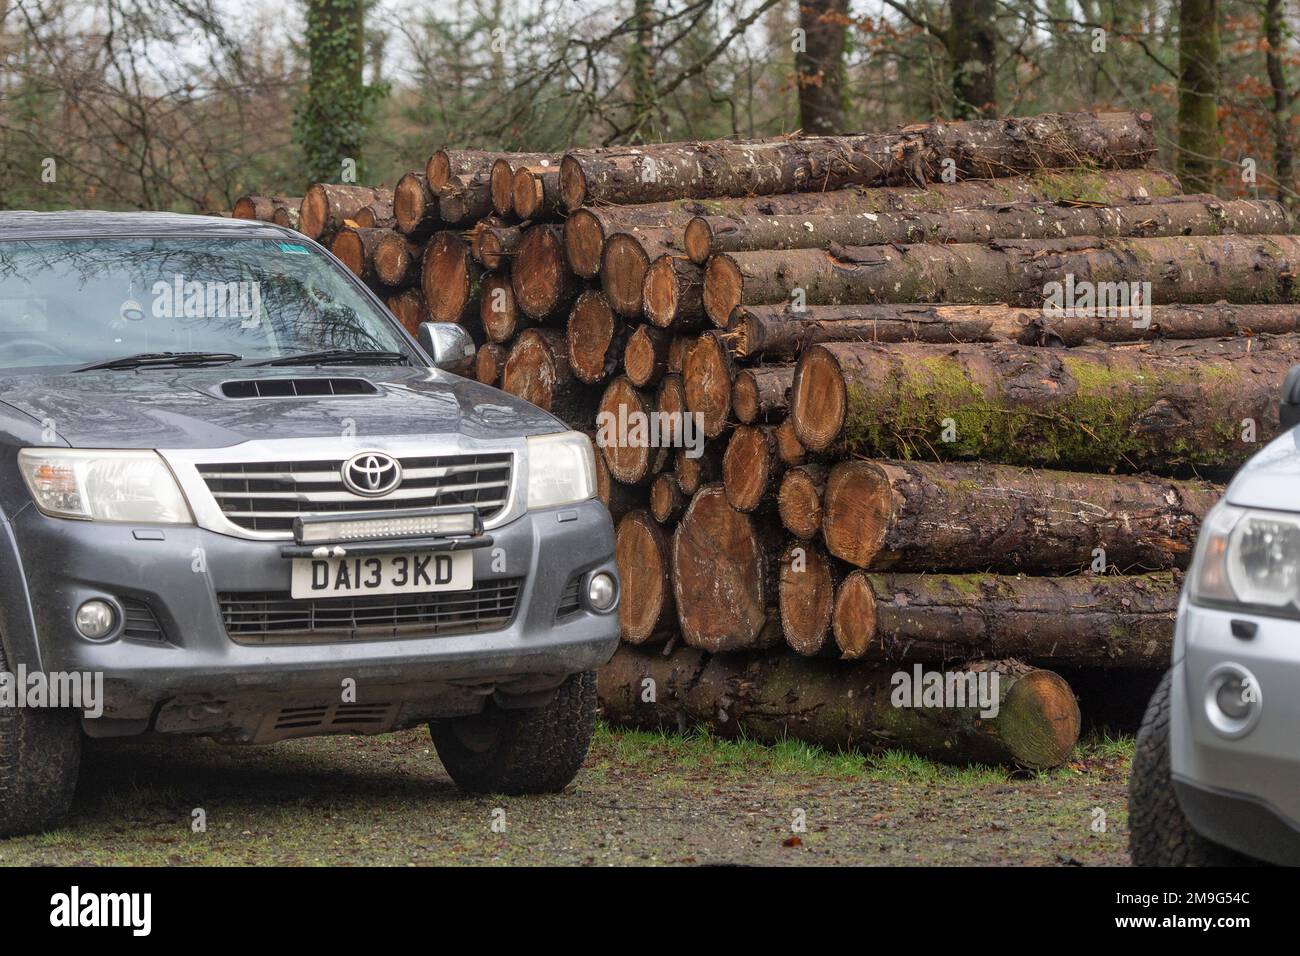 4x4 Toyota in forest with logs Stock Photo